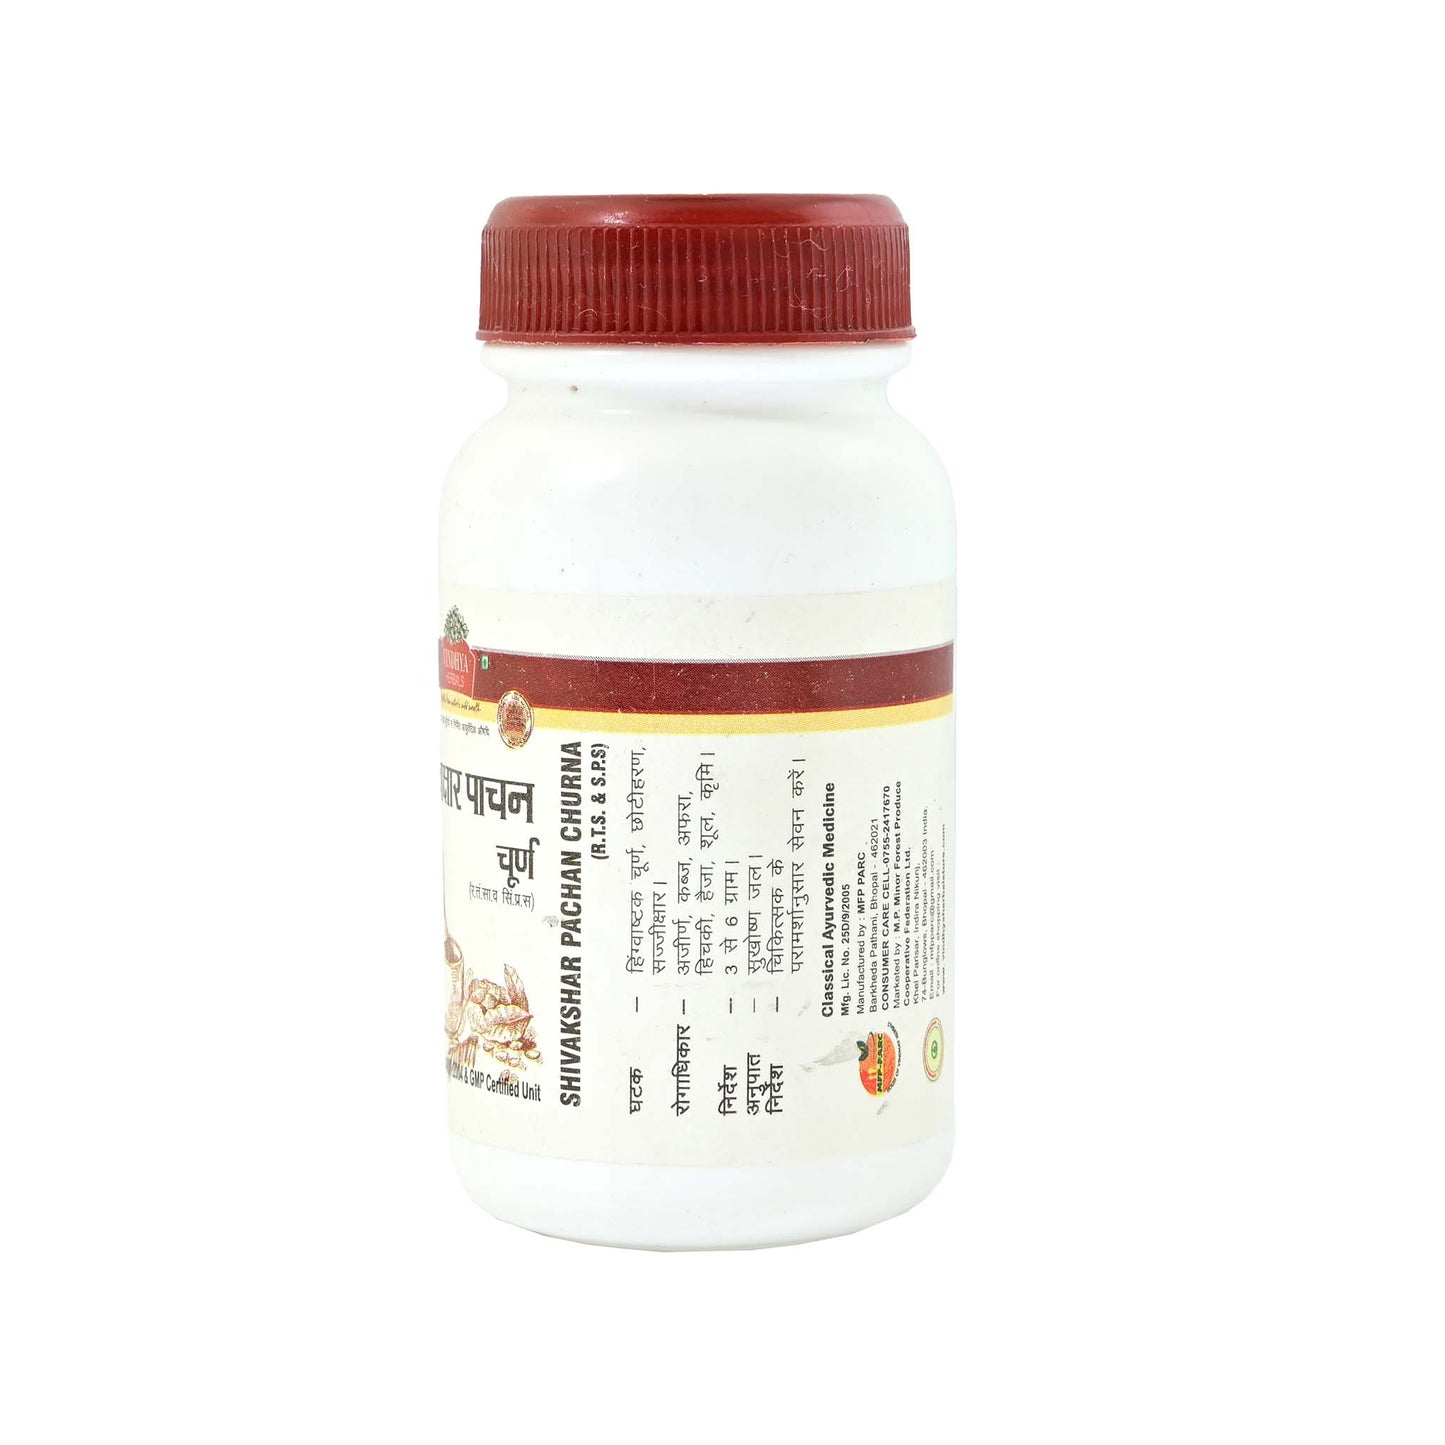 Shivakshar Churna - Natural Relief for Gastric Trouble and Constipation